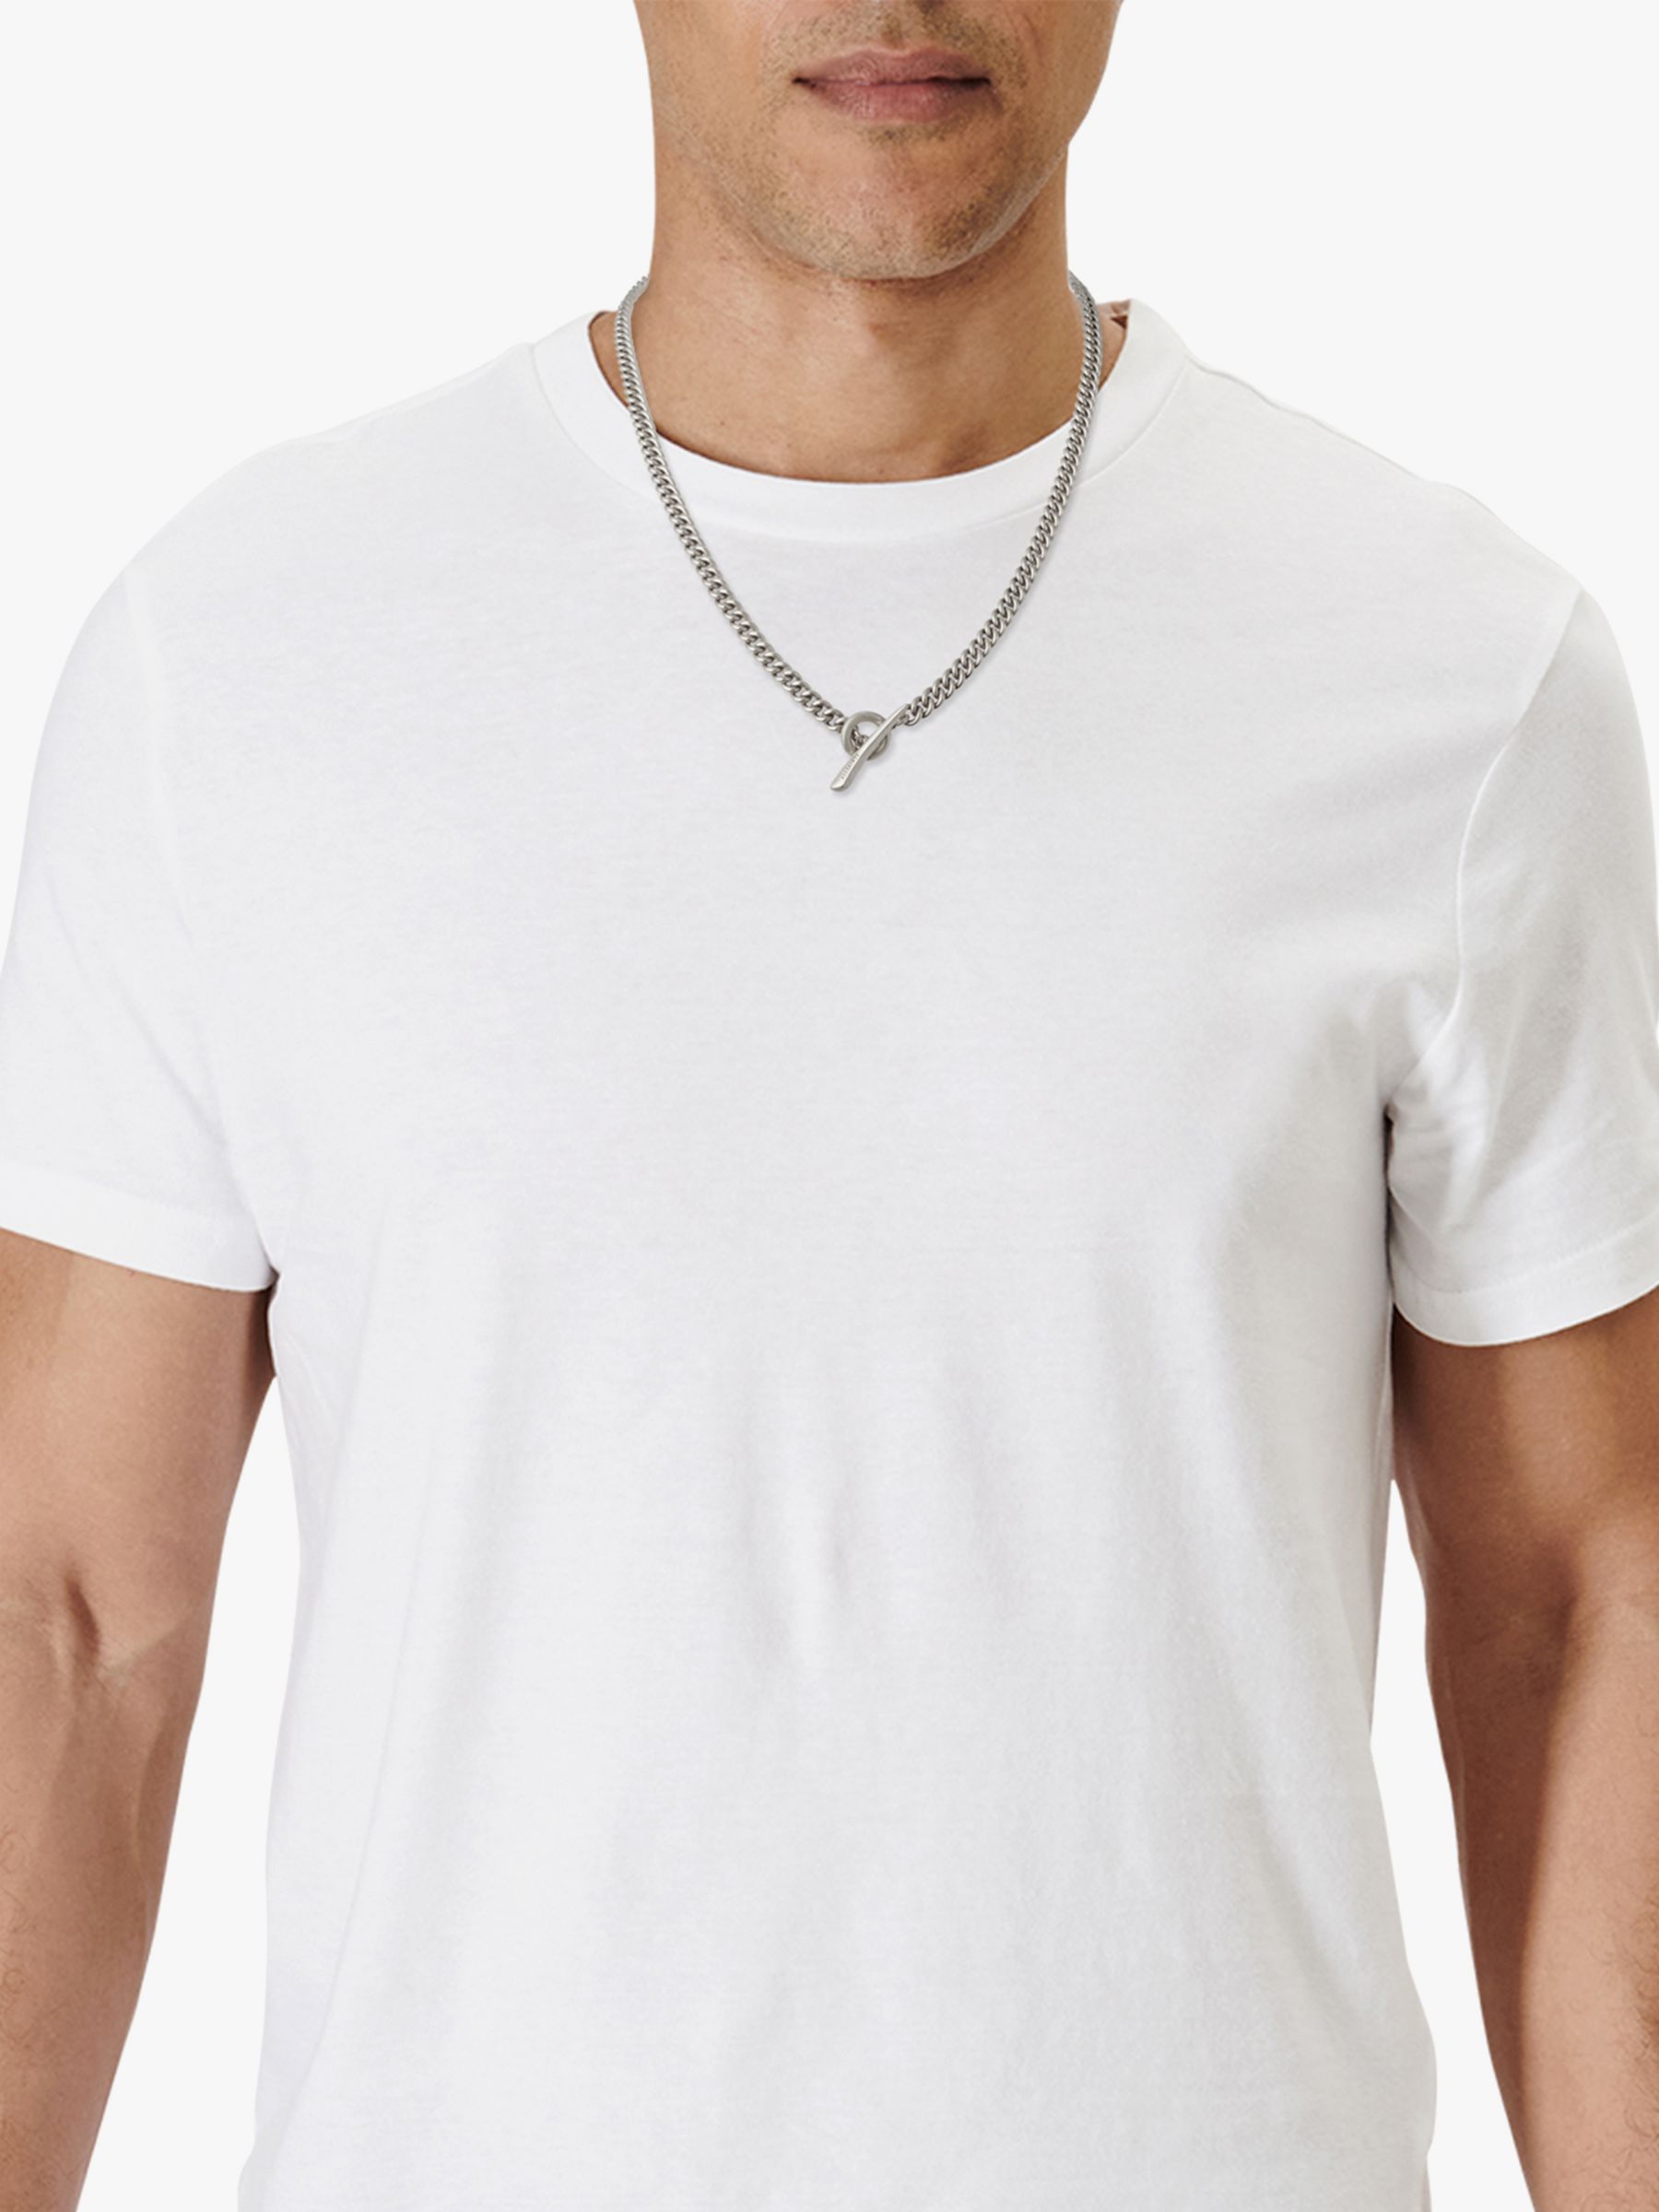 Buy AllSaints Toggle Bar Curb Chain Necklace, Warm Silver Online at johnlewis.com